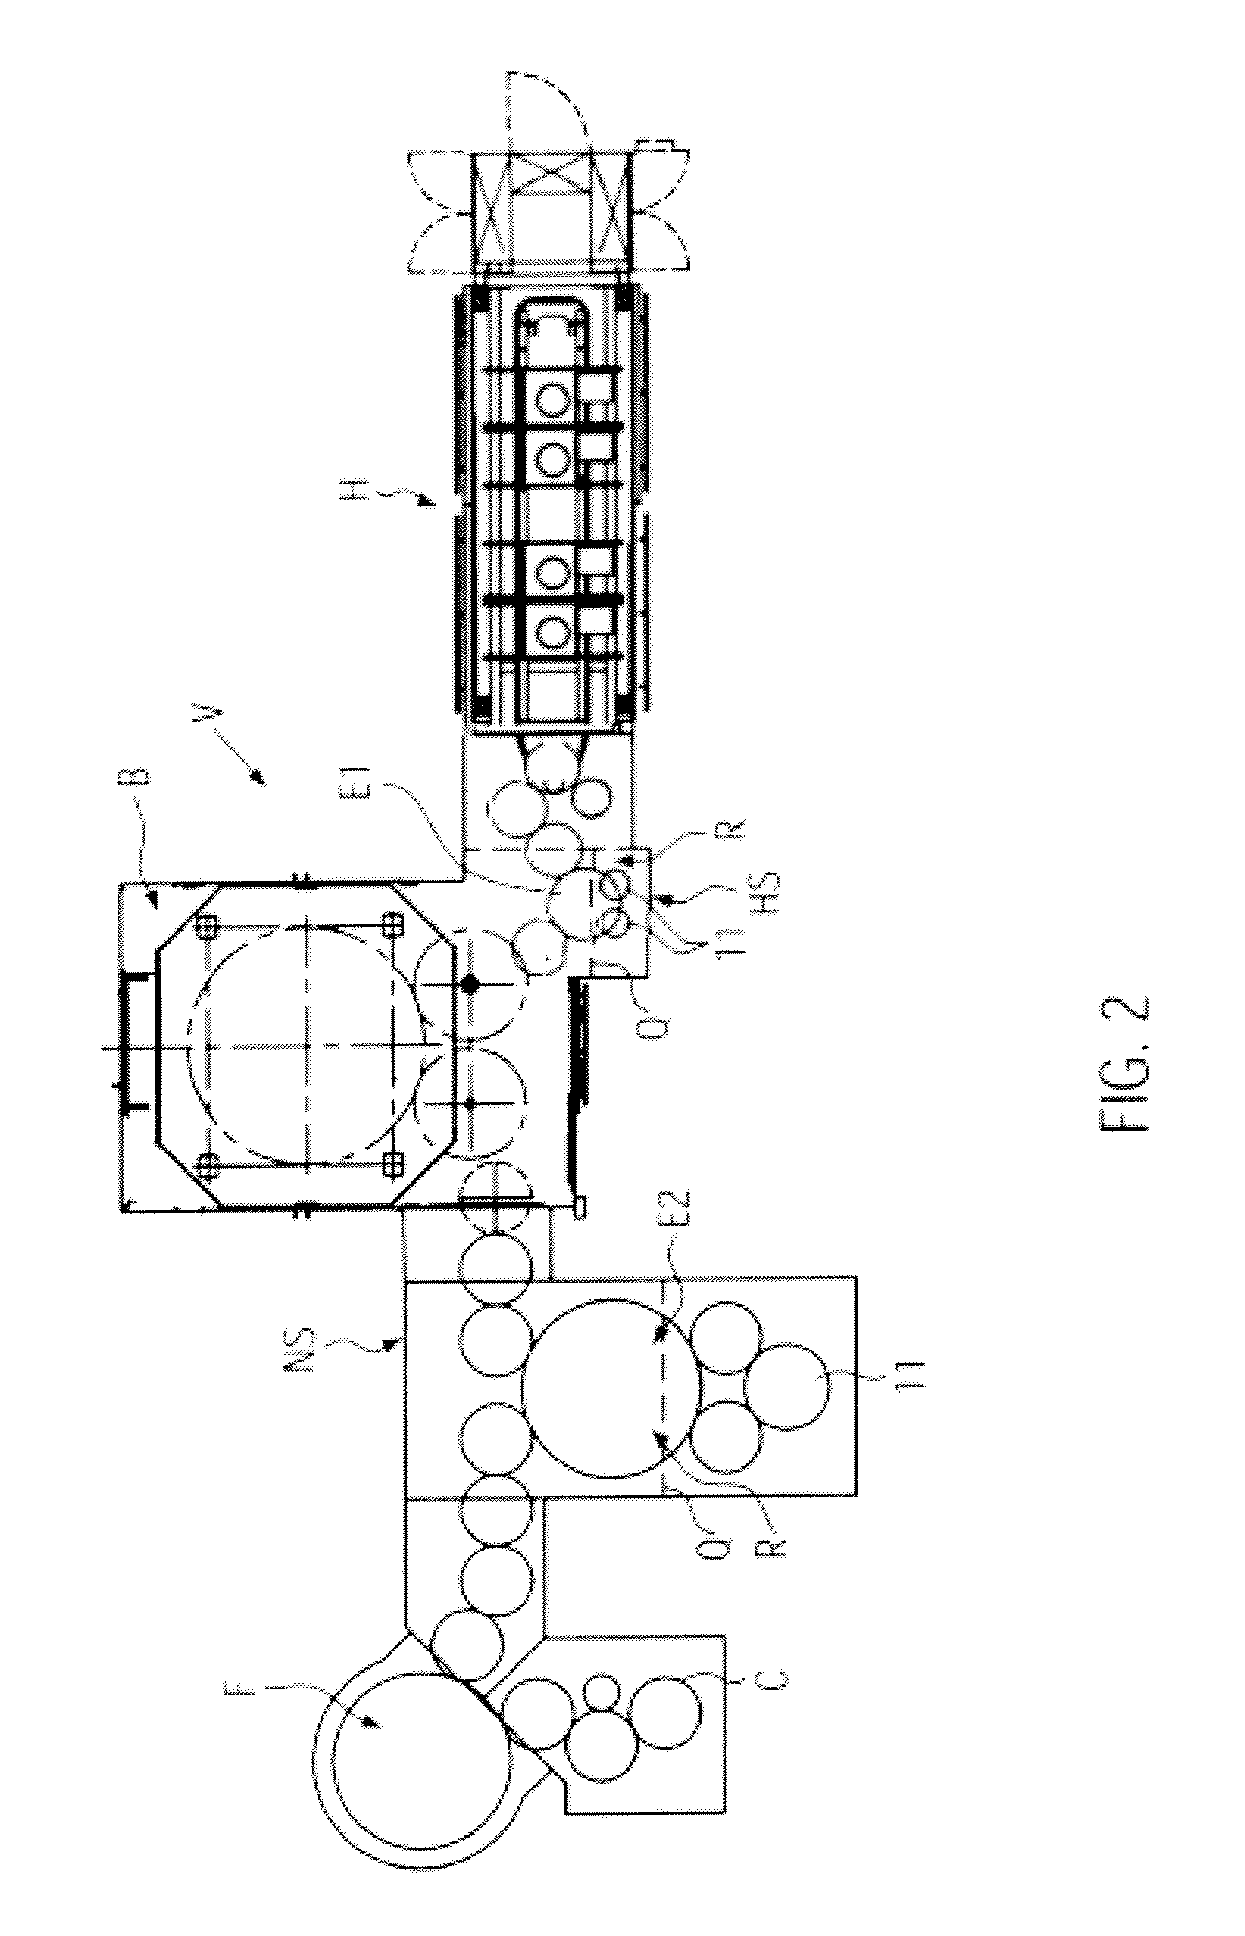 Method and Device for Stretch Blow Molding or Blow Molding and Filling Sterile Containers